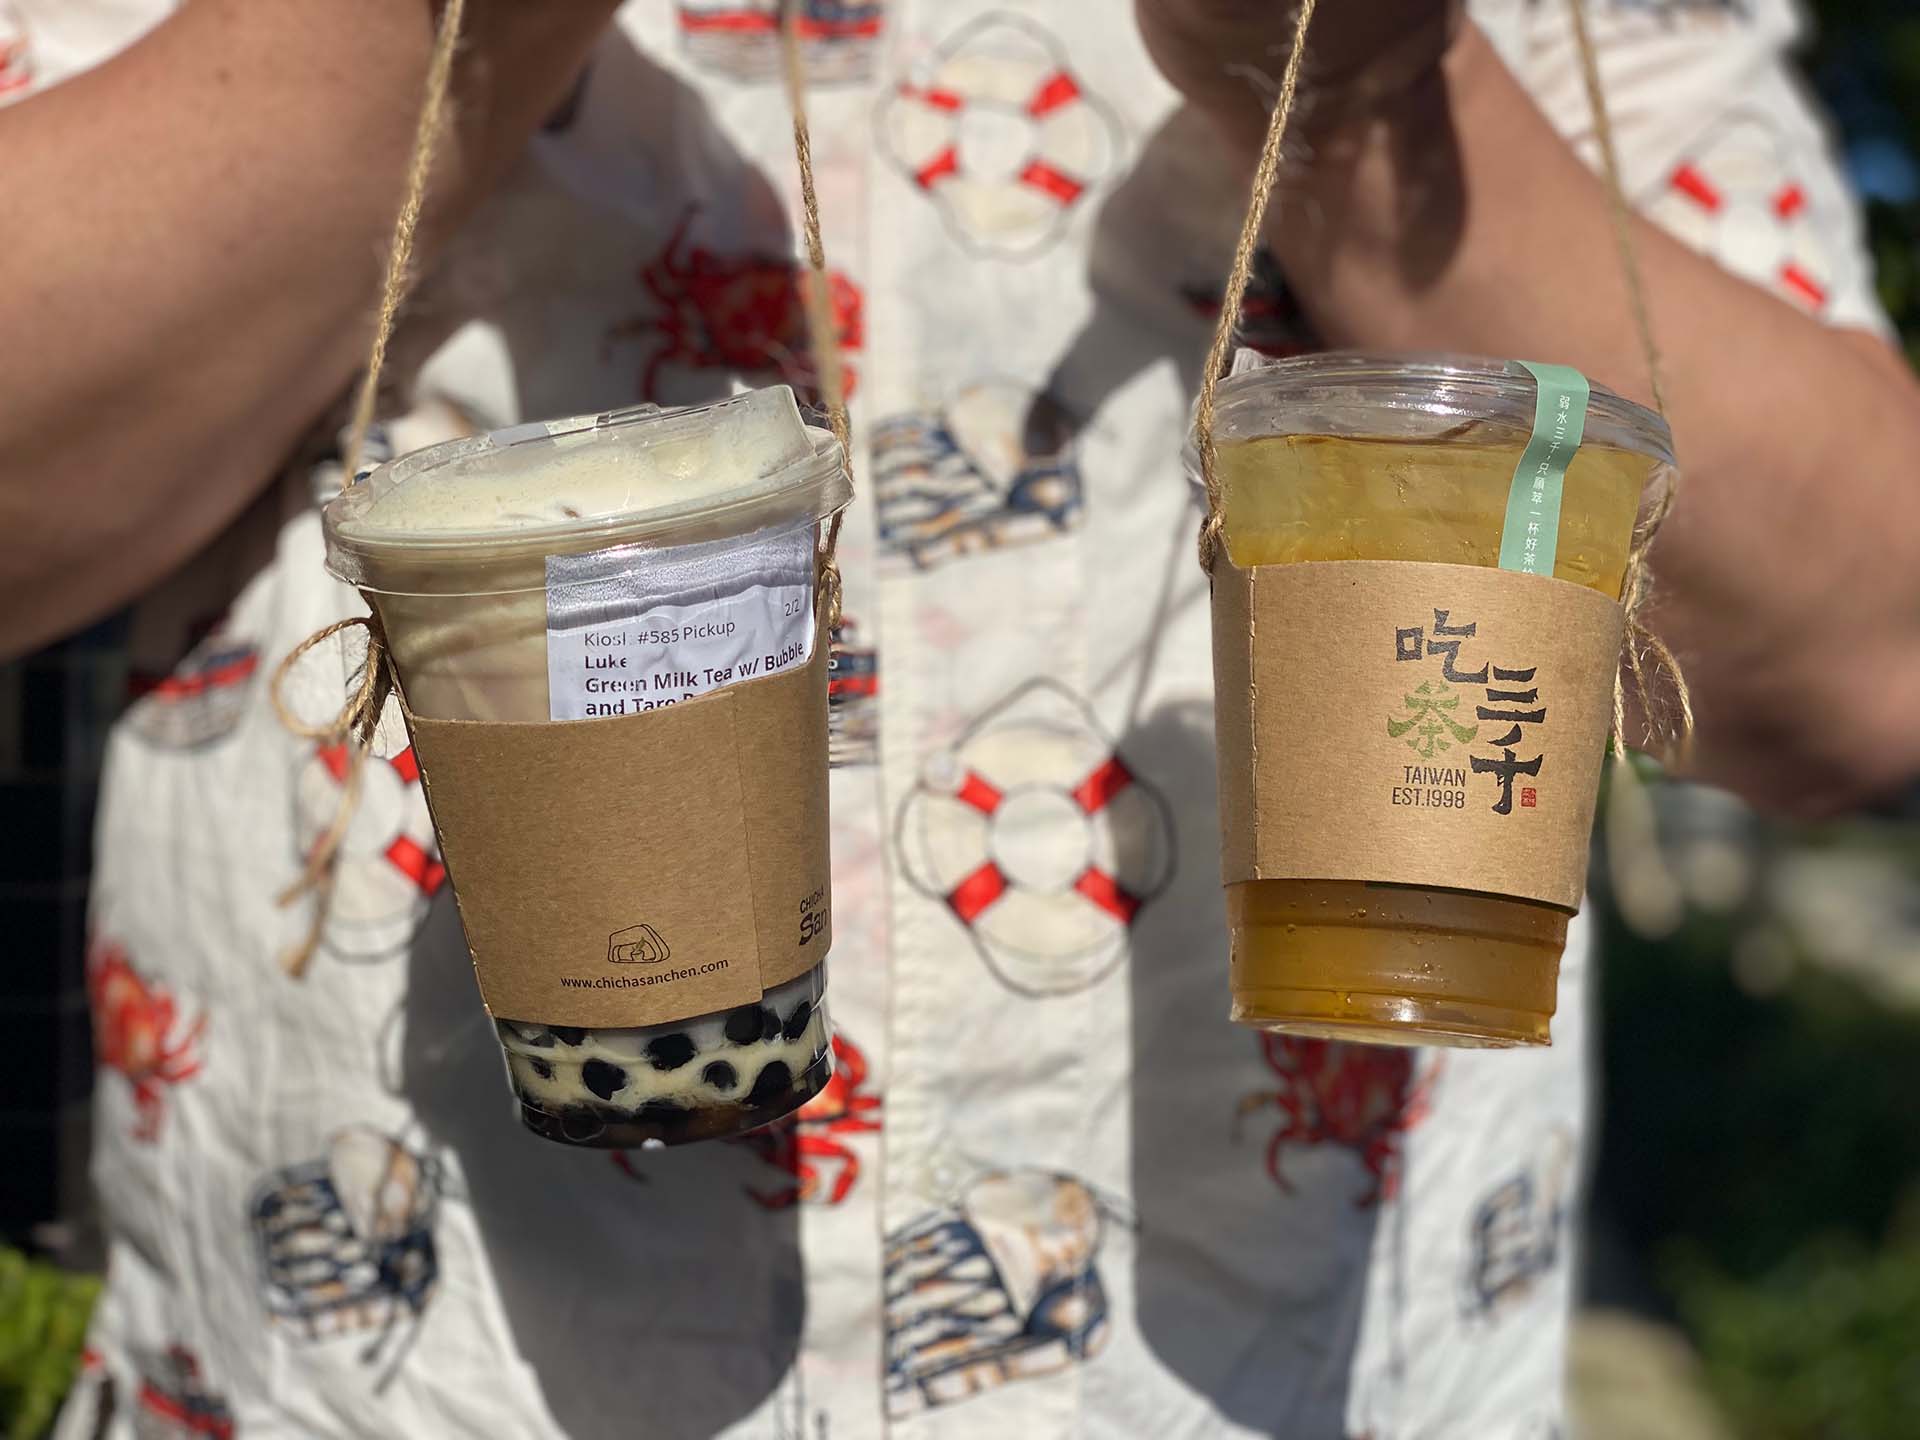 Close-up of a man holding two boba drinks using boba totes made of twine.